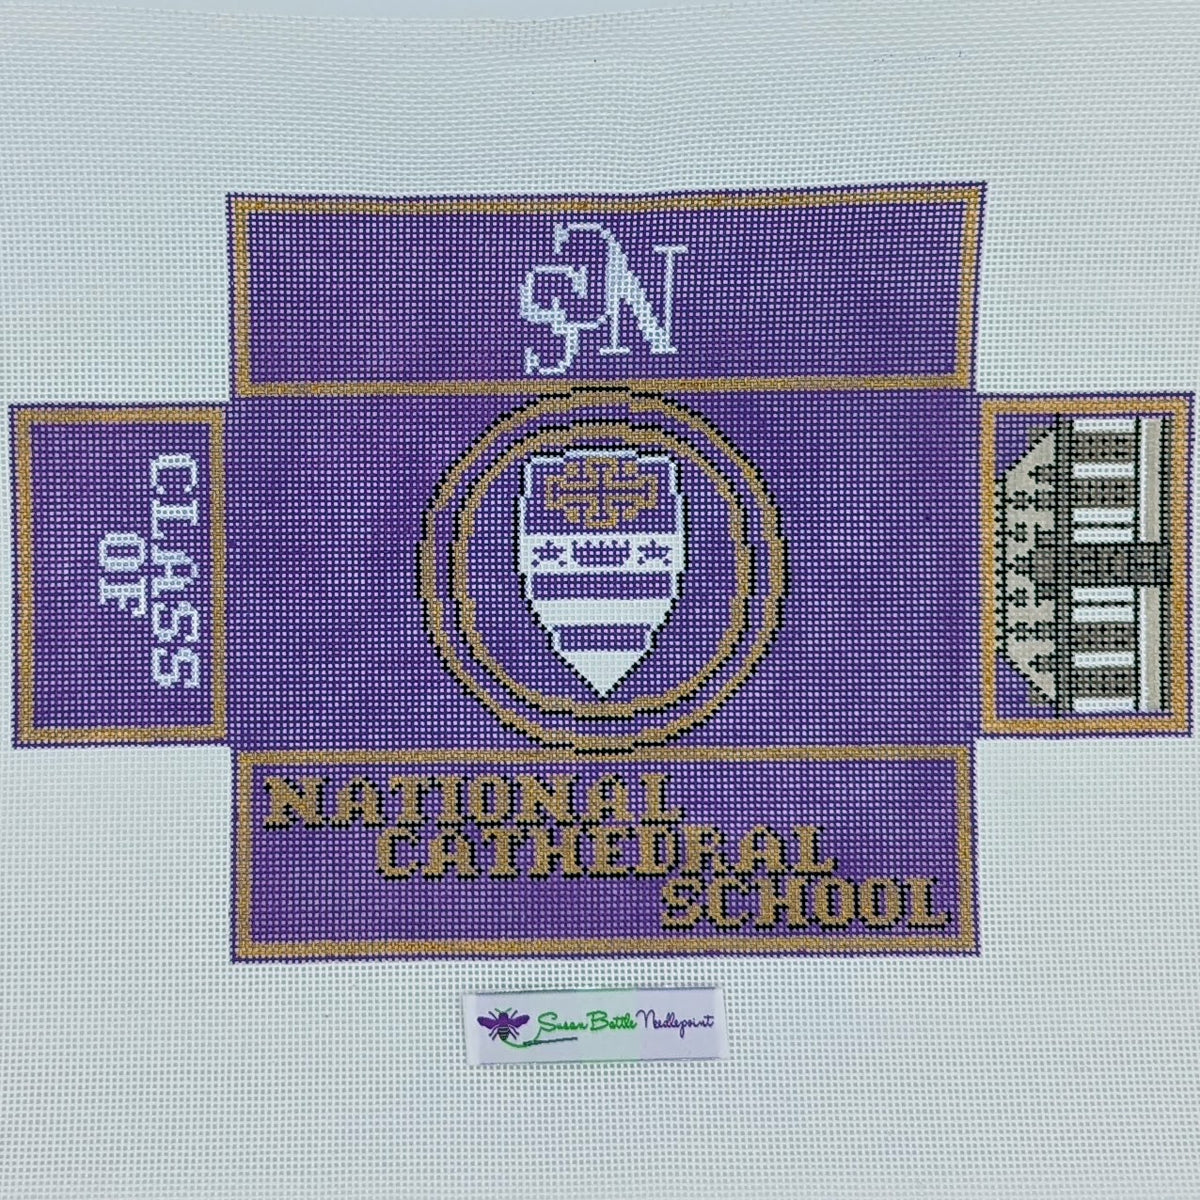 NCS, National Cathedral School Brick Cover